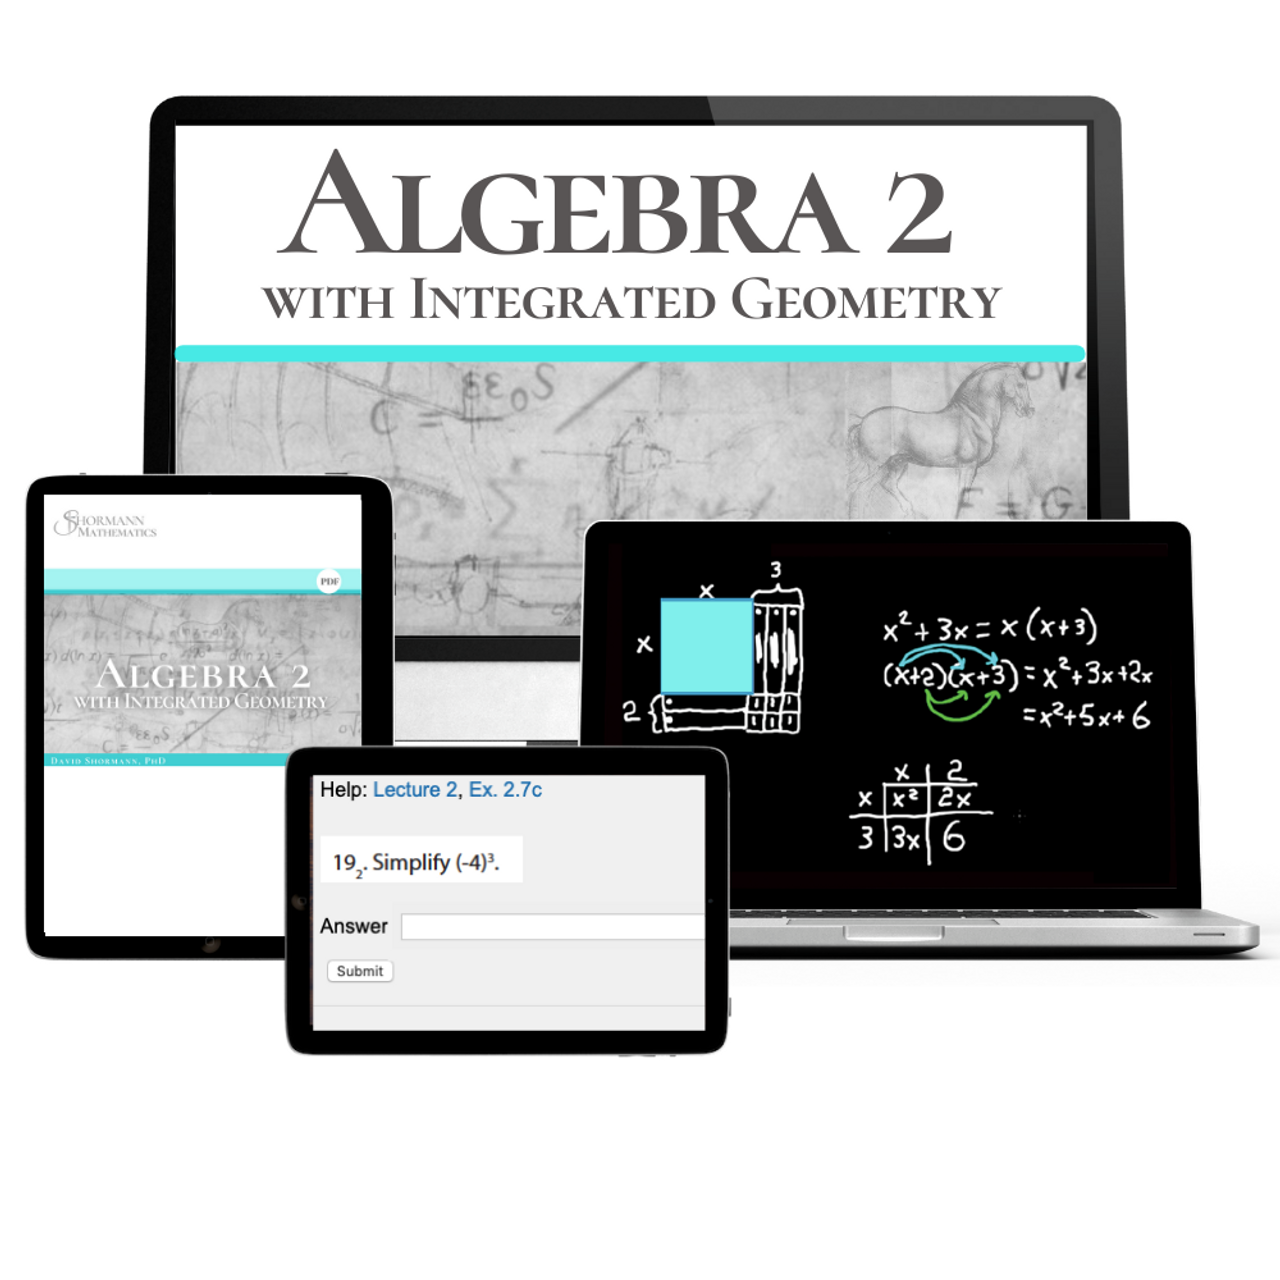 eLearning　Interactive　Video　Integrated　Digital　Course　Shormann　Self-Paced　Geometry　Algebra　with　Education